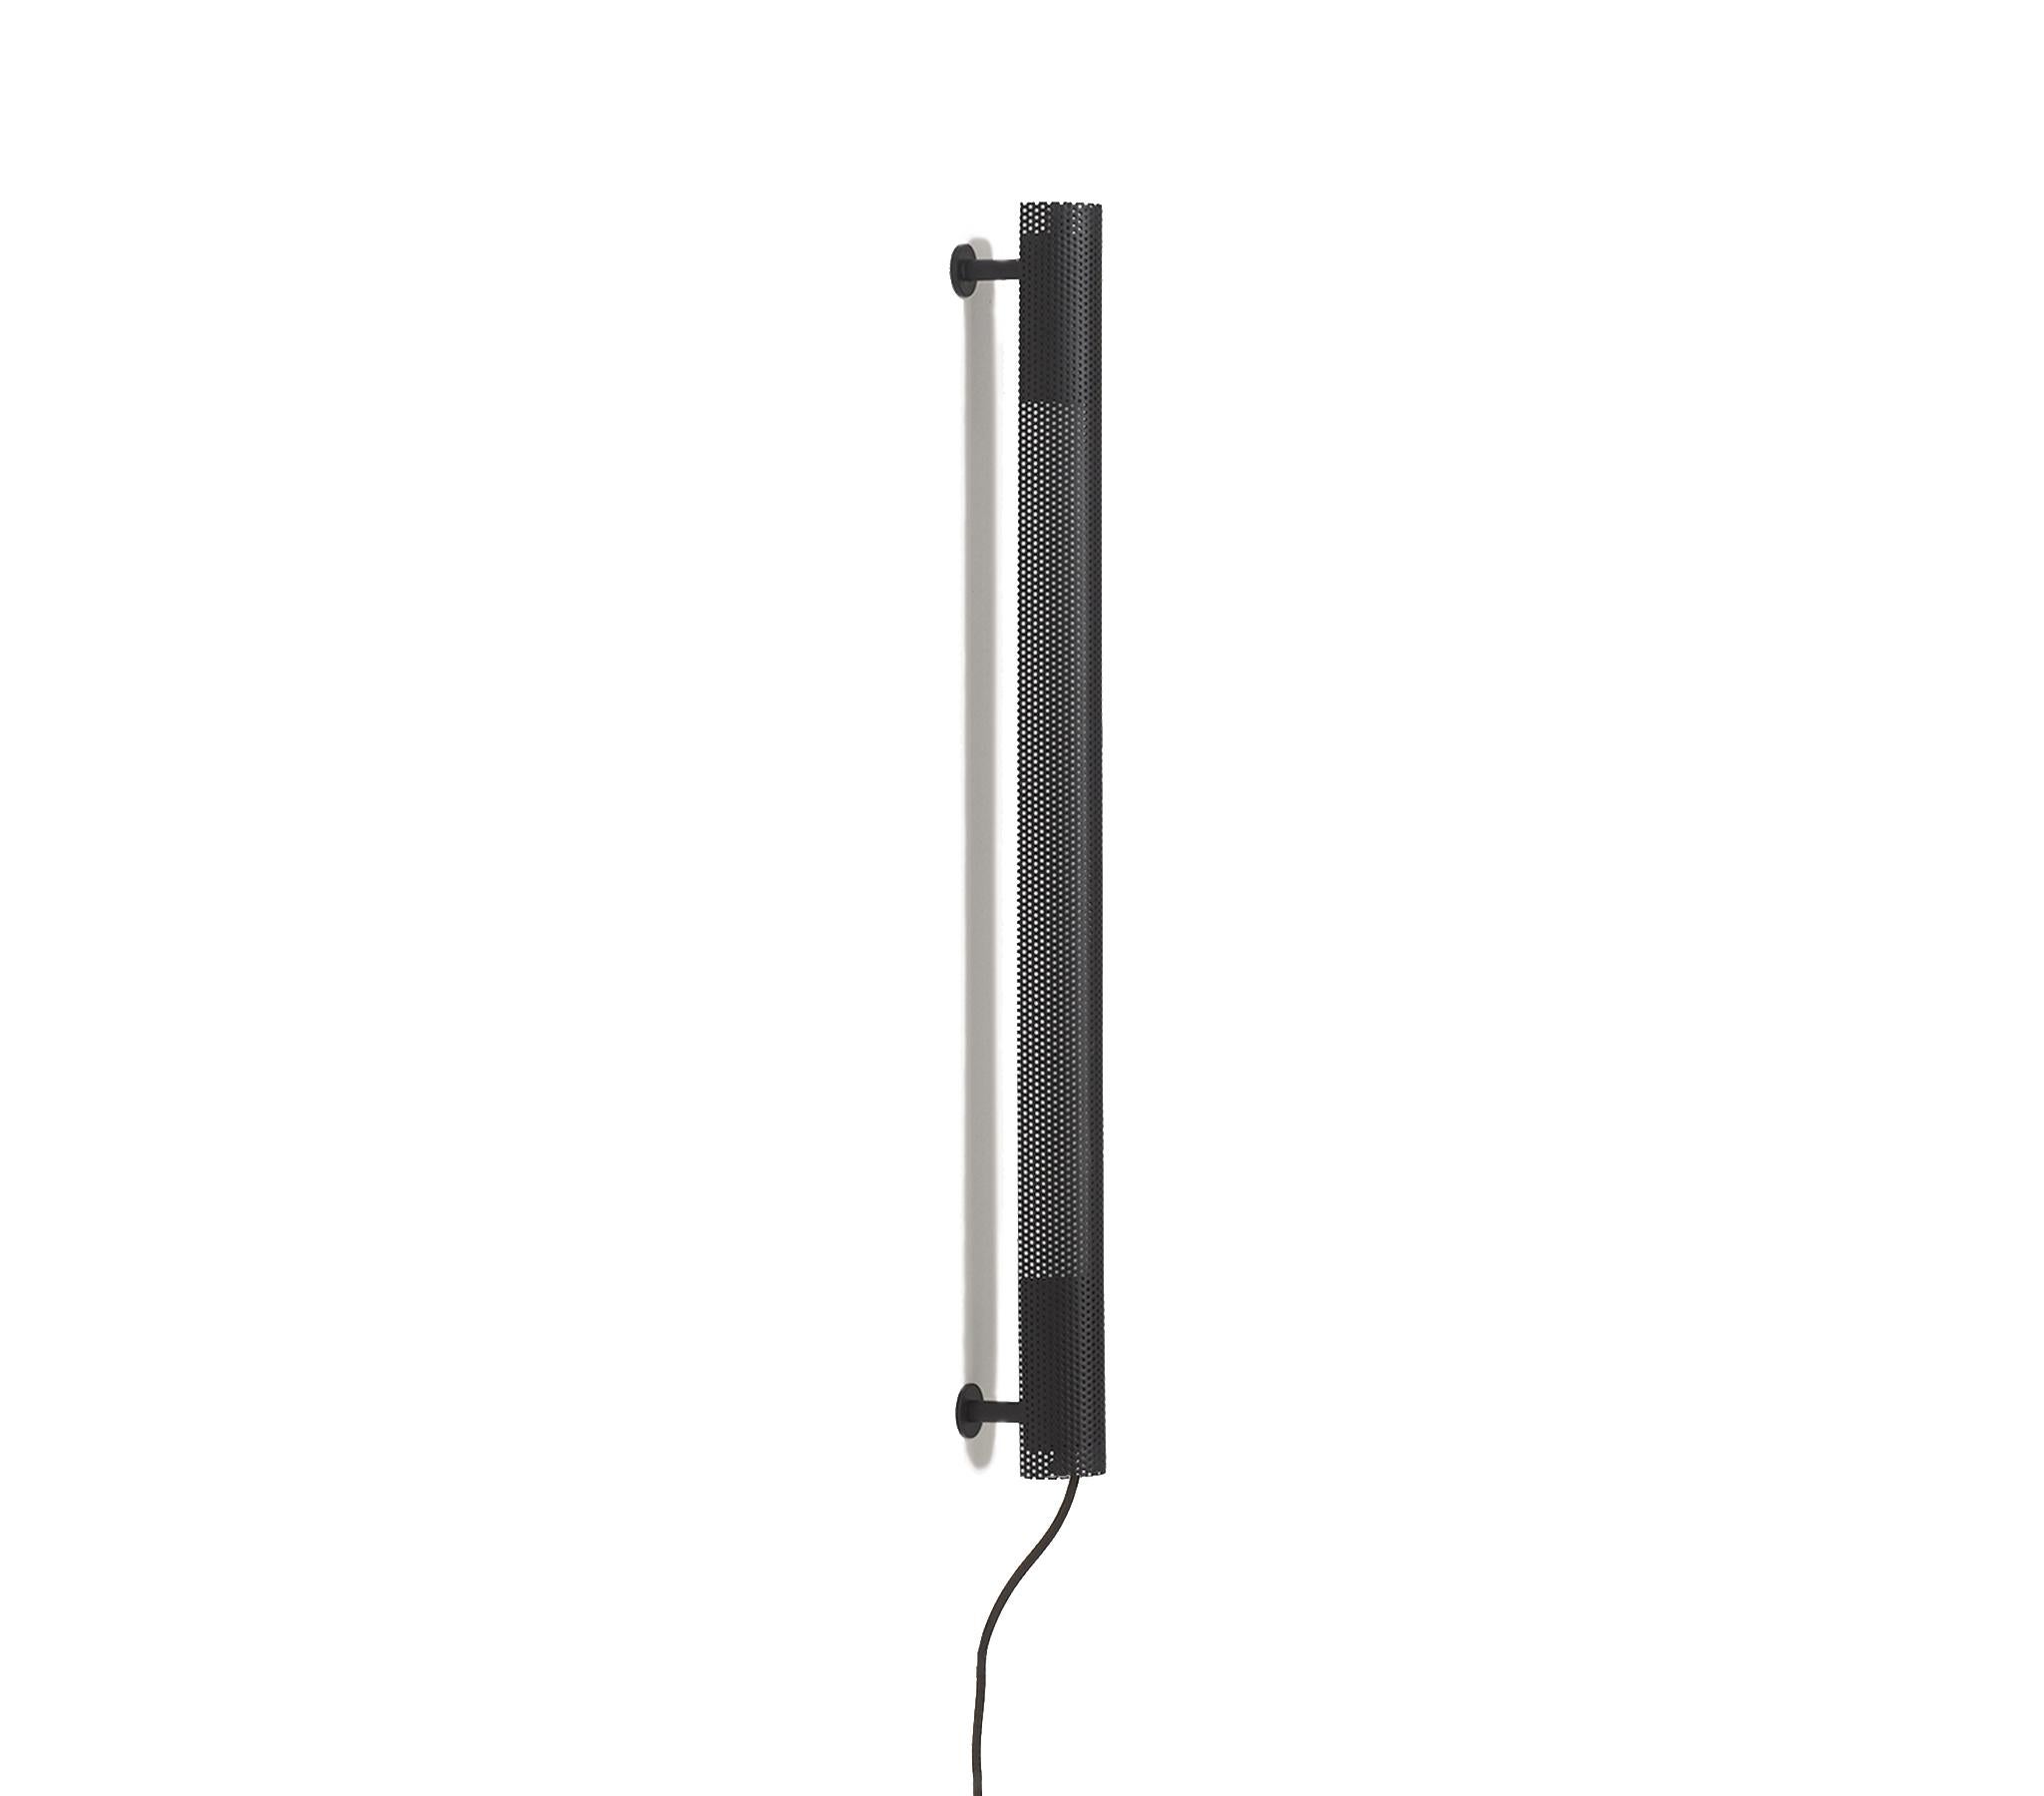 Radent wall lamp is based on a standard LED light and is a slim radiant linear wall lamp. The Radent Wall Lamp is available in two sizes with a black, white or brass finish. Measure: 700 mm.